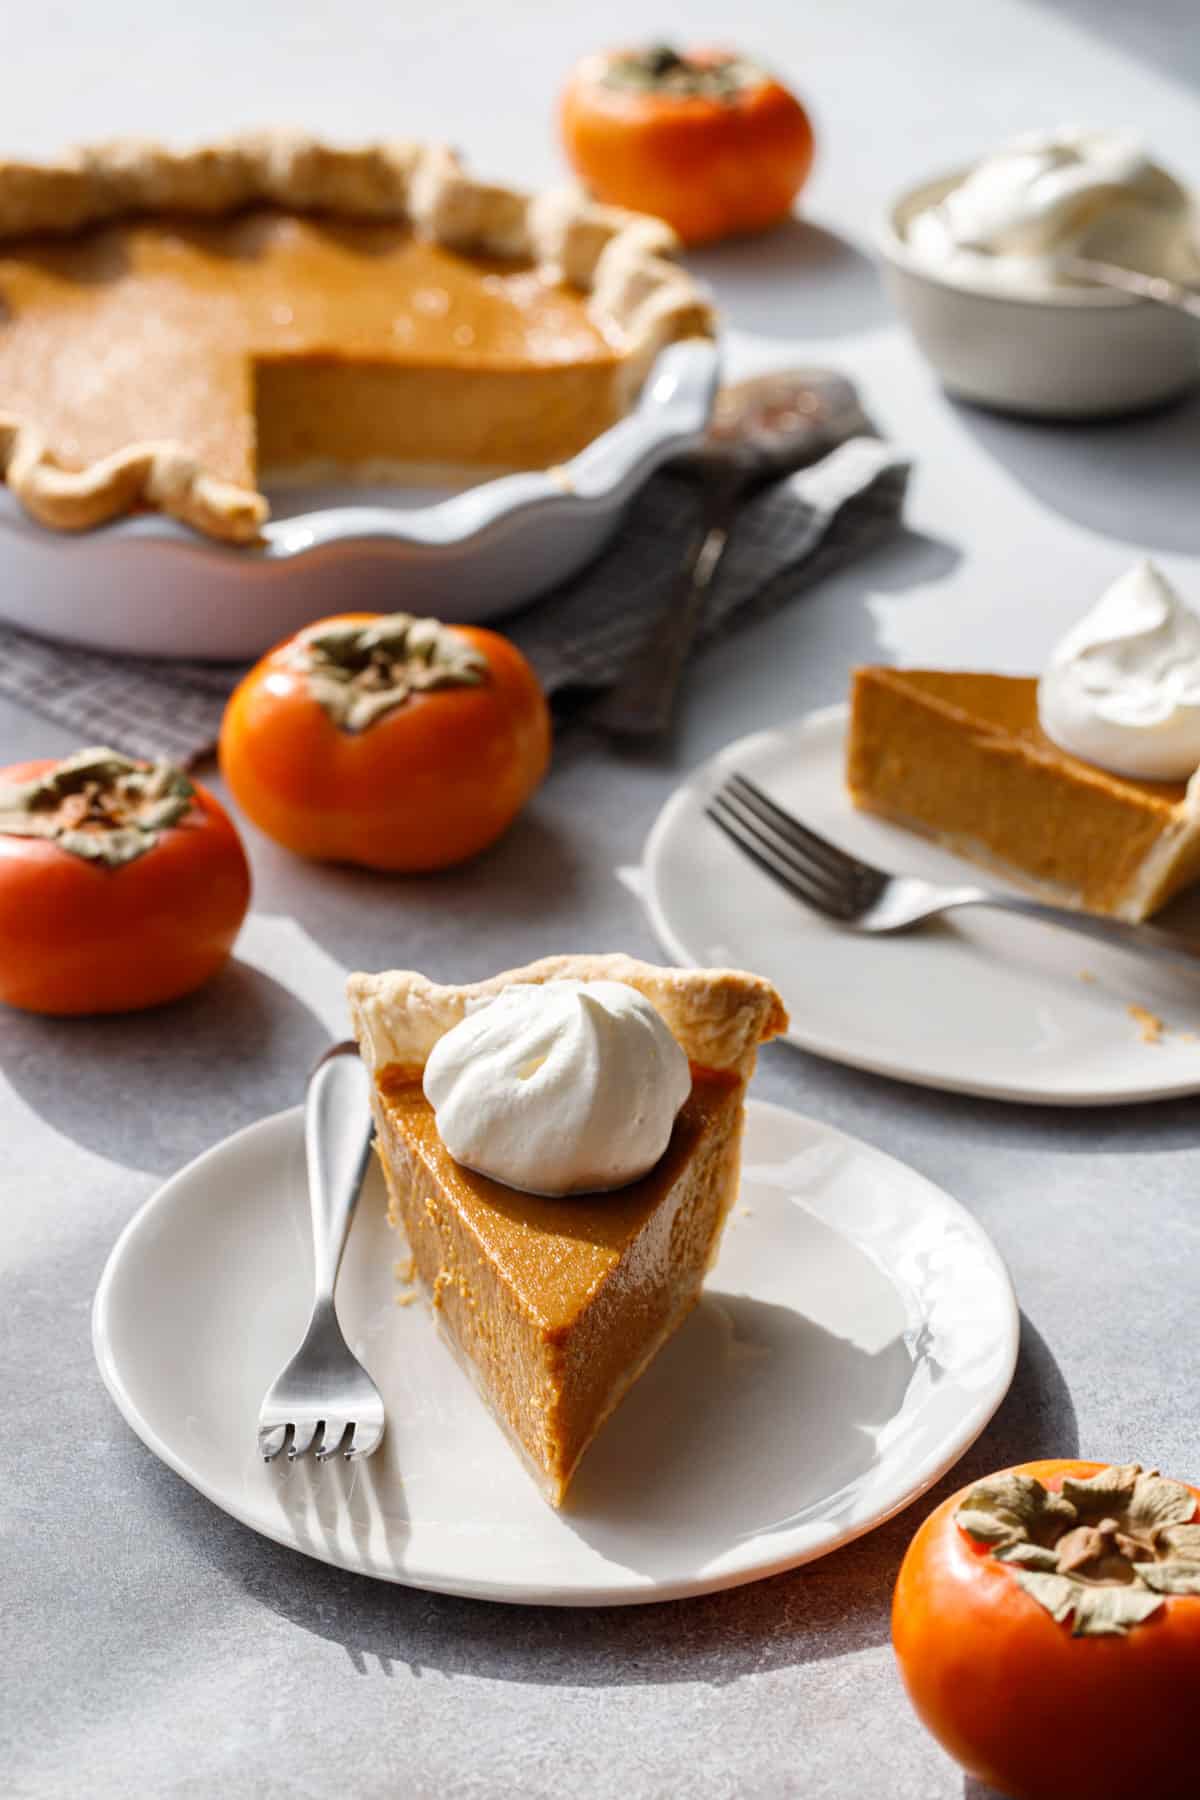 Slices of Persimmon Pie on white plates, what's left of the full pie in the background along with a few Fuyu persimmons.